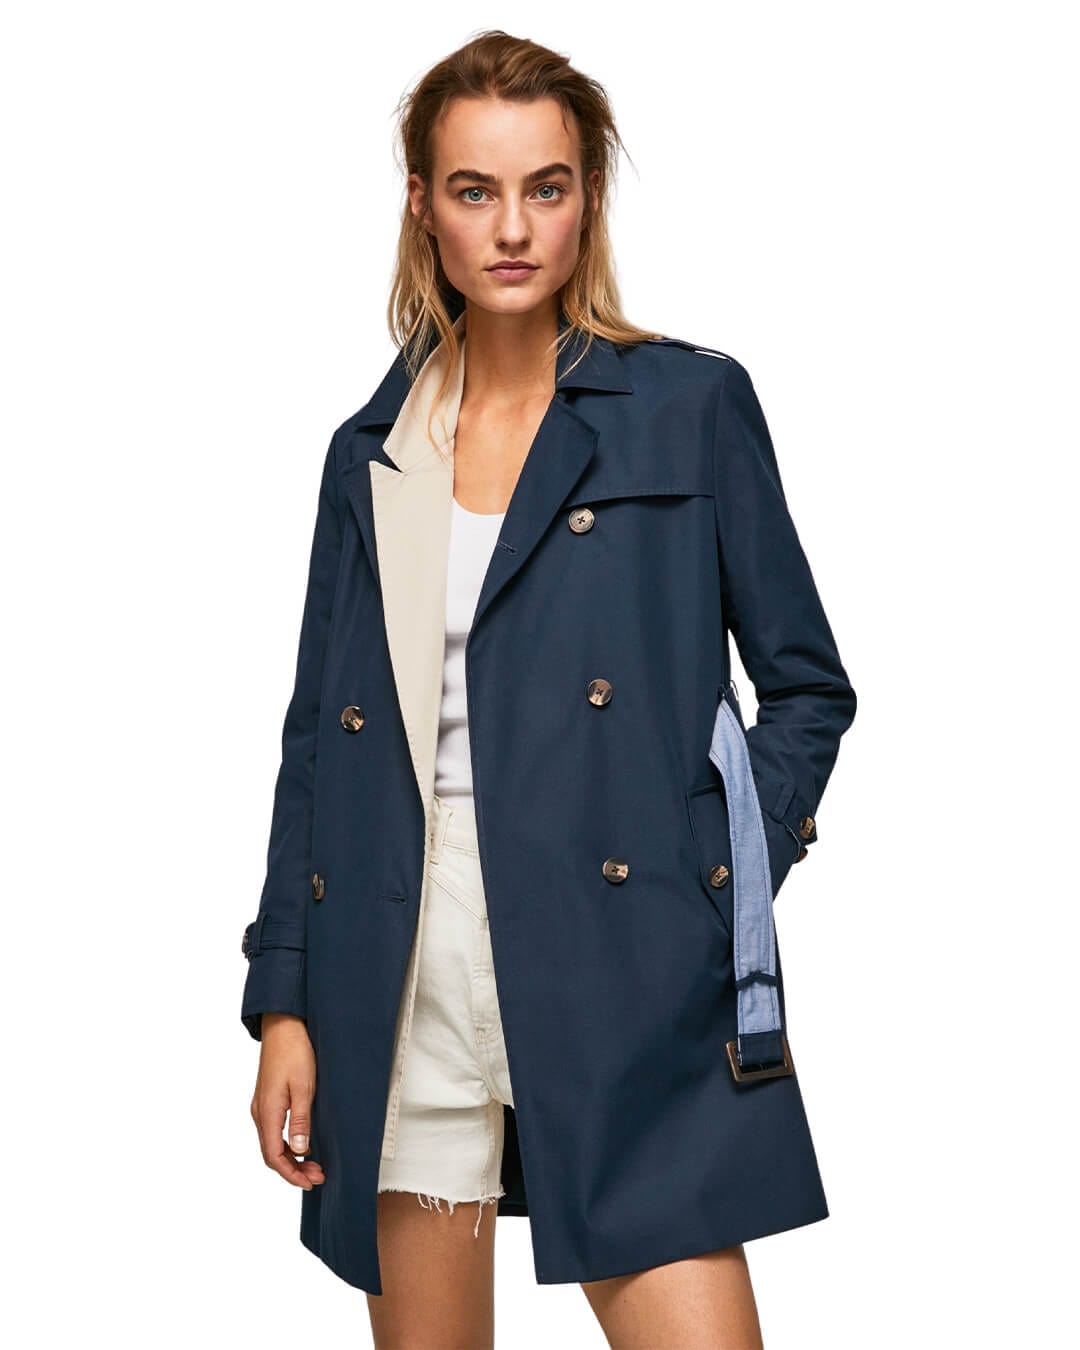 Pepe Jeans Outerwear Pepe Jeans Classic Twill Navy Trench Coat